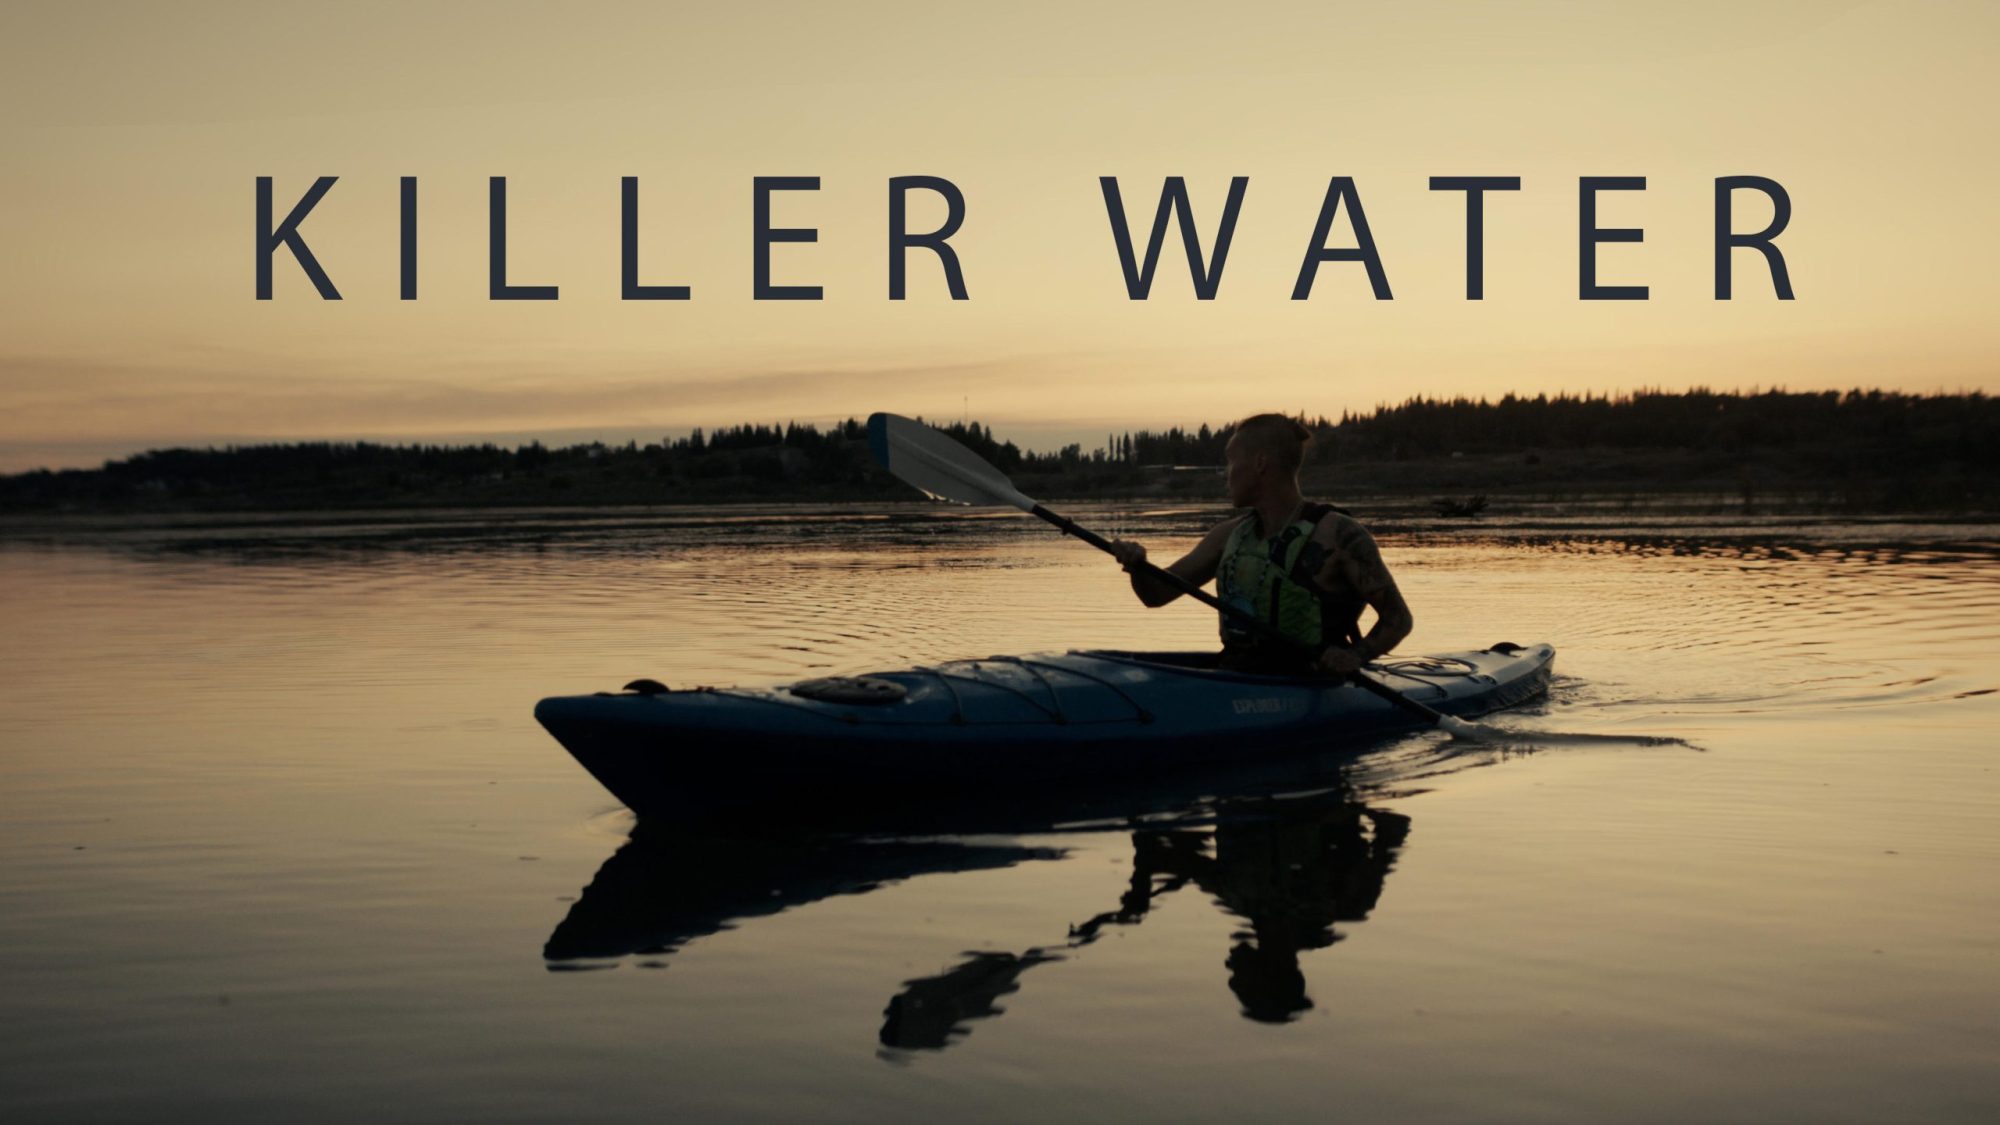 Movie poster for "Killer Water" featuring a photo of Mikisew Cree member Calvin Waquan paddling on a kayak near Lake Athabasca at dusk with the words "Killer Water" above him. Poster/image by Geordie Day.